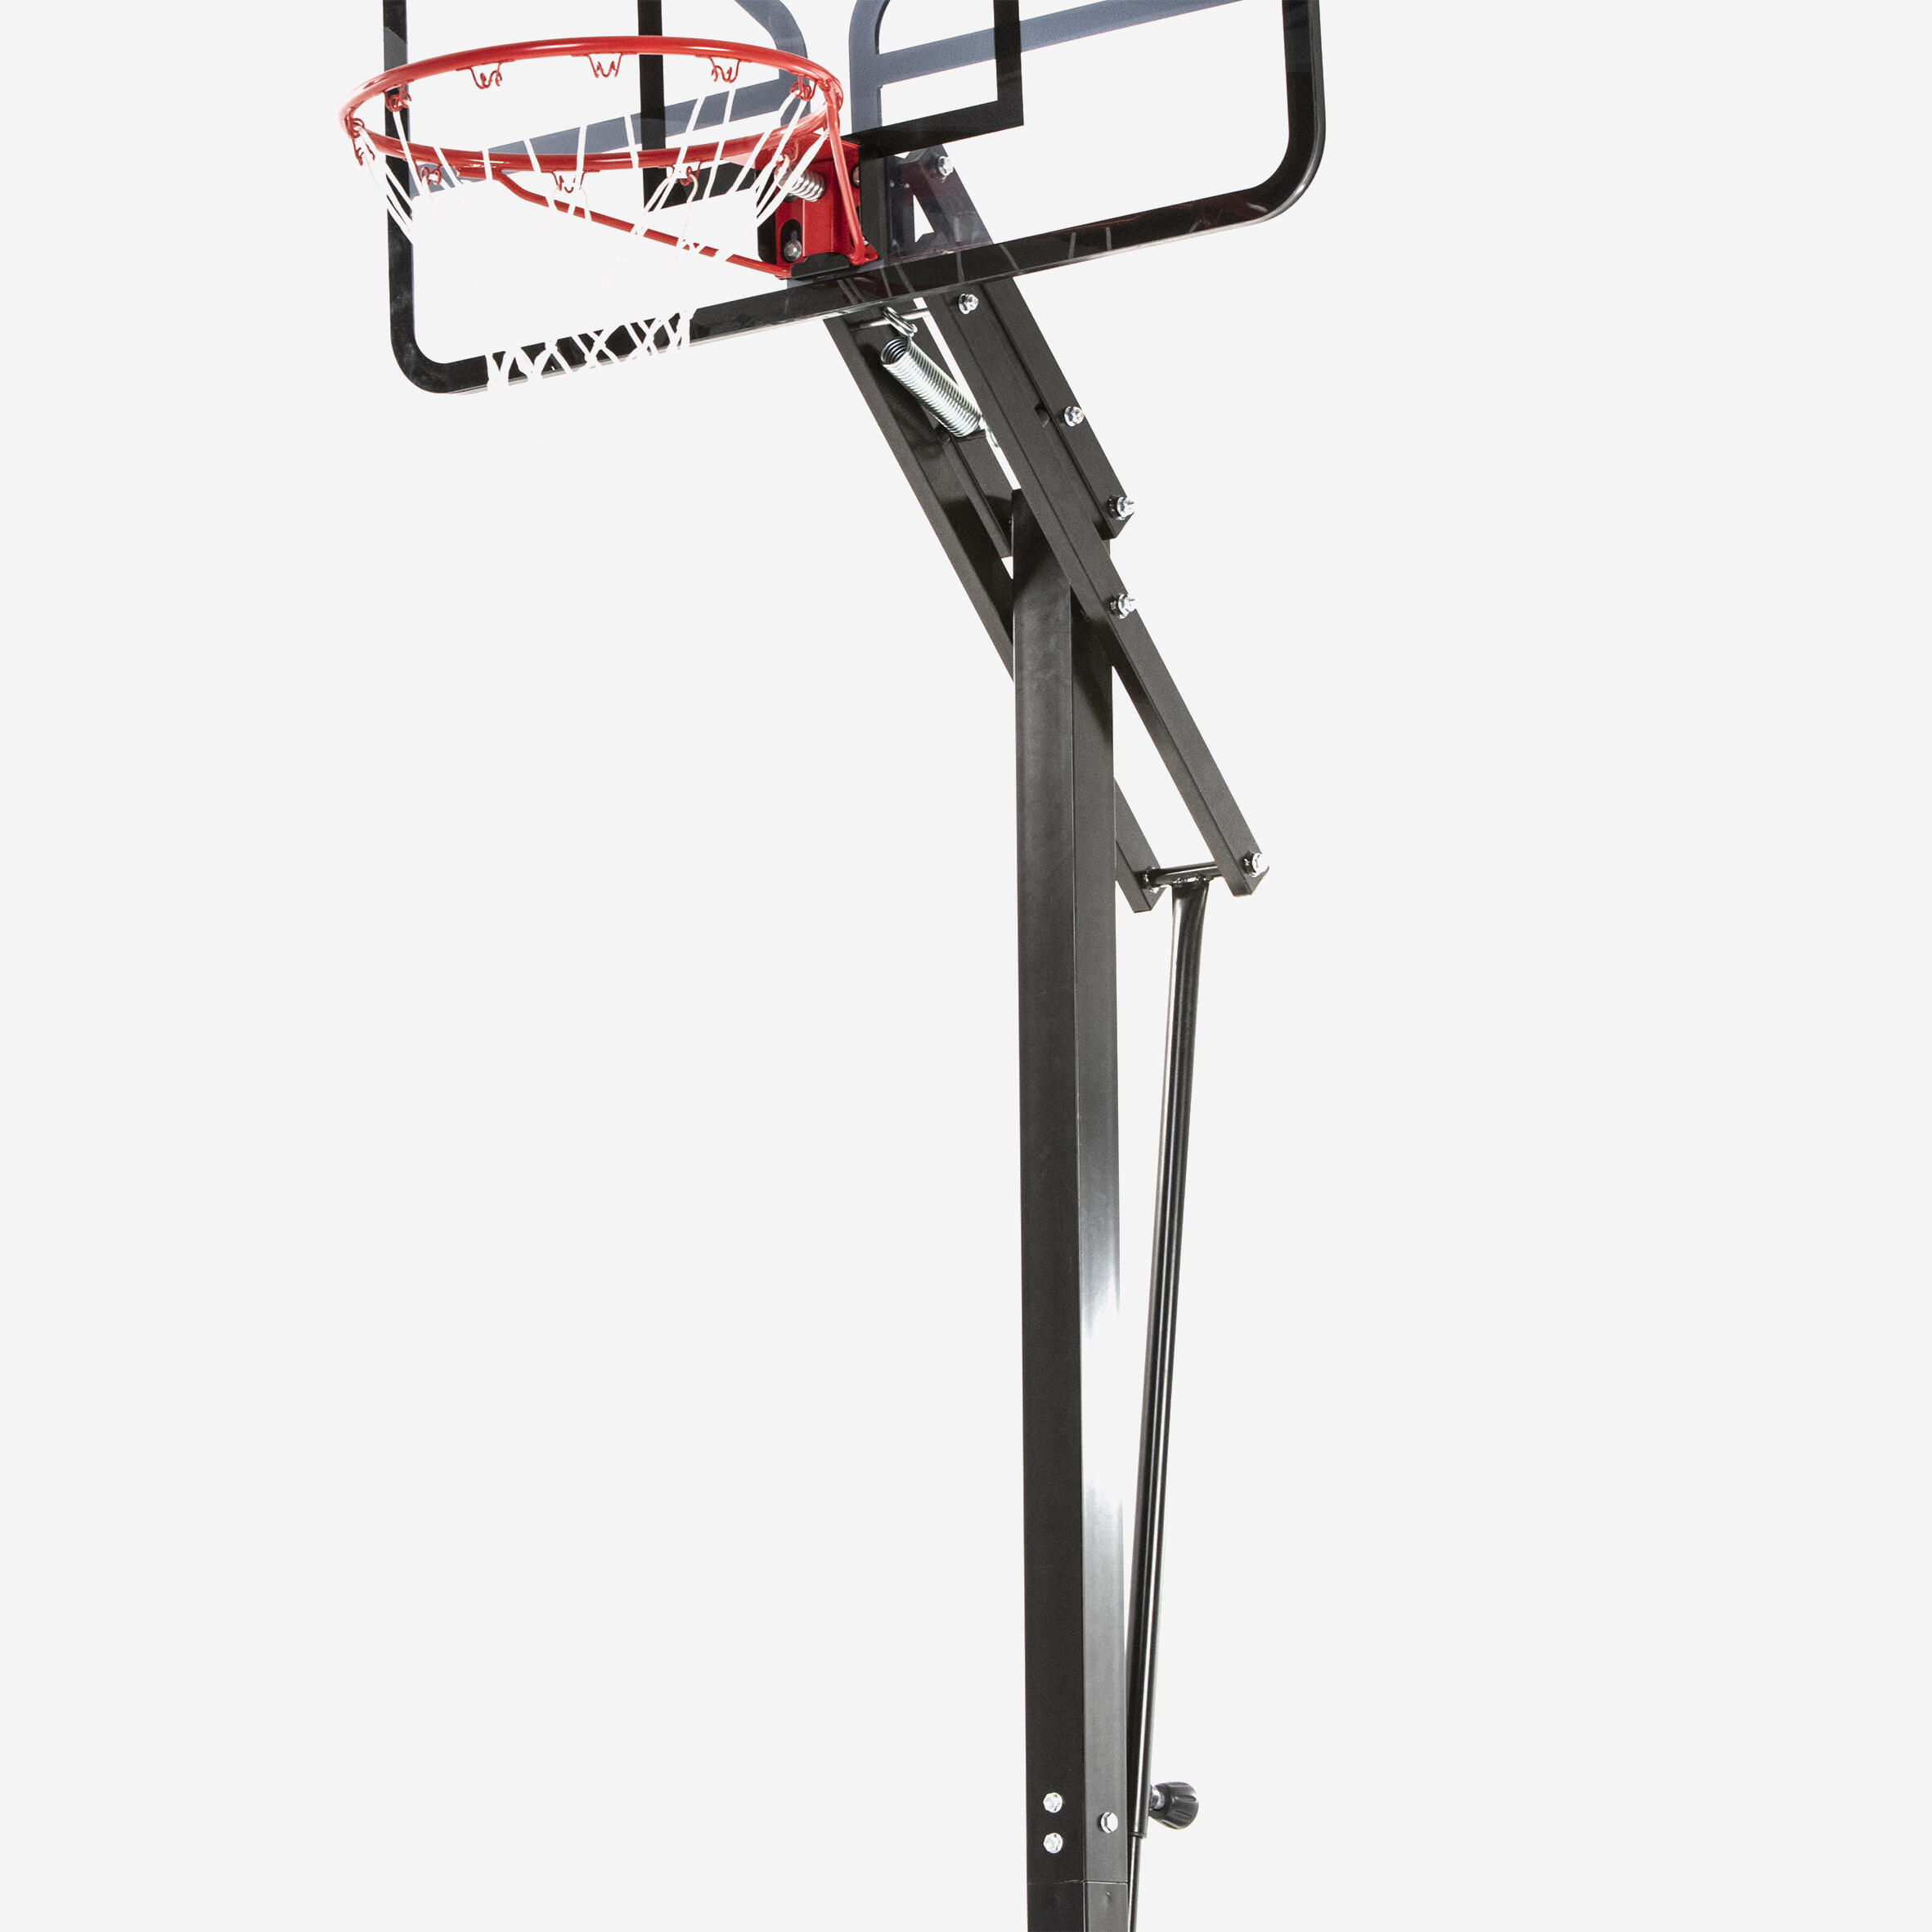 Basketball Hoop with Easy-Adjustment Stand (2.40m to 3.05m) B700 Pro 5/7